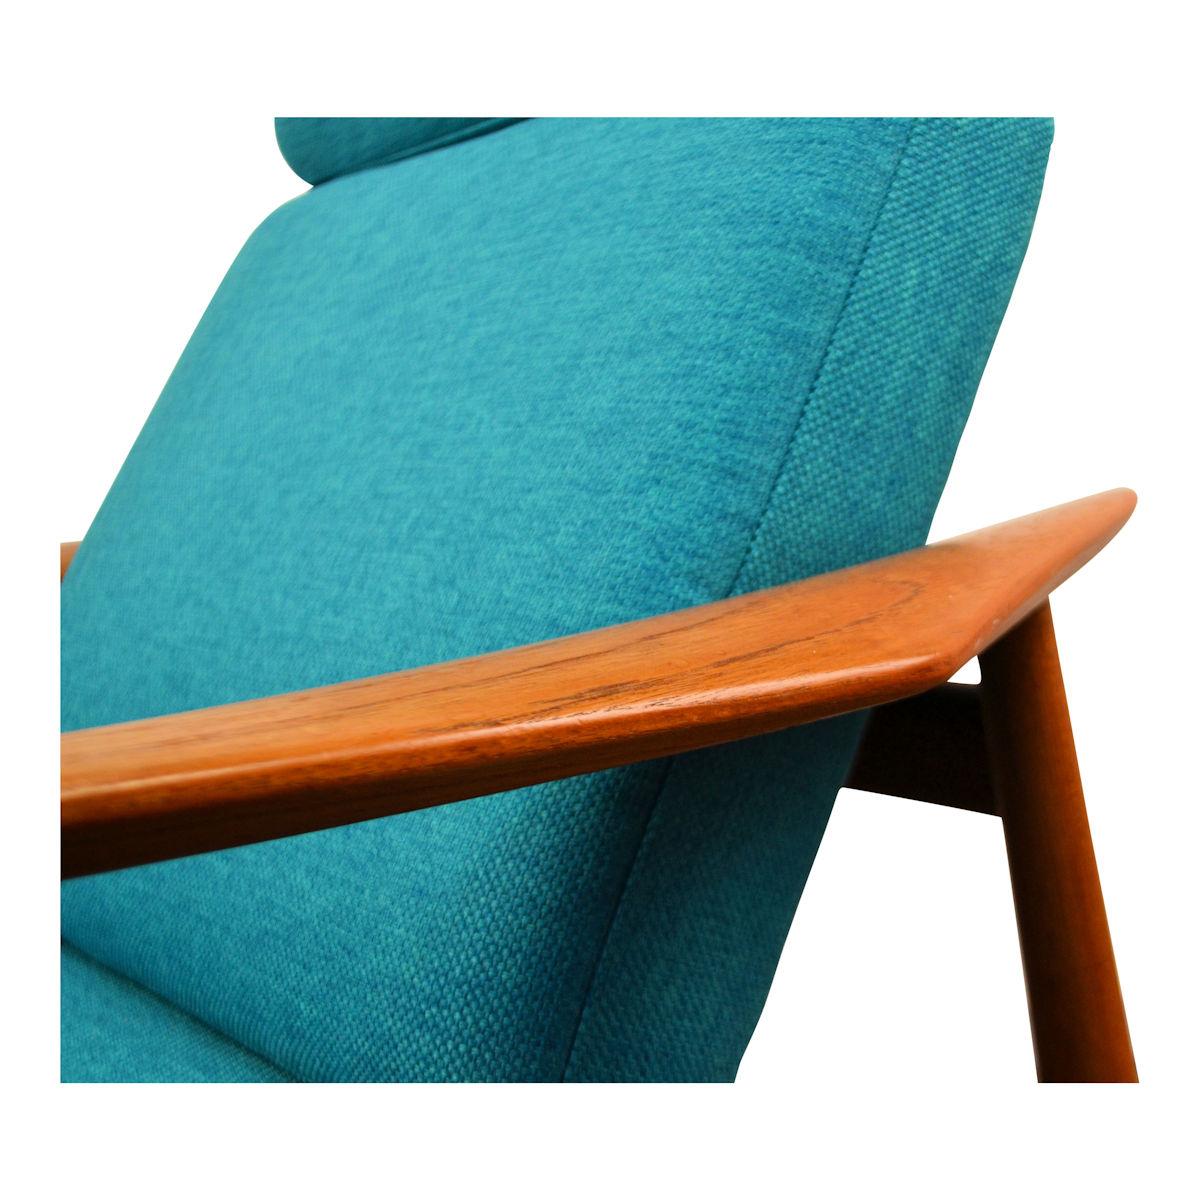 Stylish Danish modern model FD164 easy chair designed by Arne Vodder for Danish manufacturer Cado. This comfortable, solid teak chair features a typical organic Arne Vodder design with blue upholstery and matching ottoman. Adjustable in 3 positions